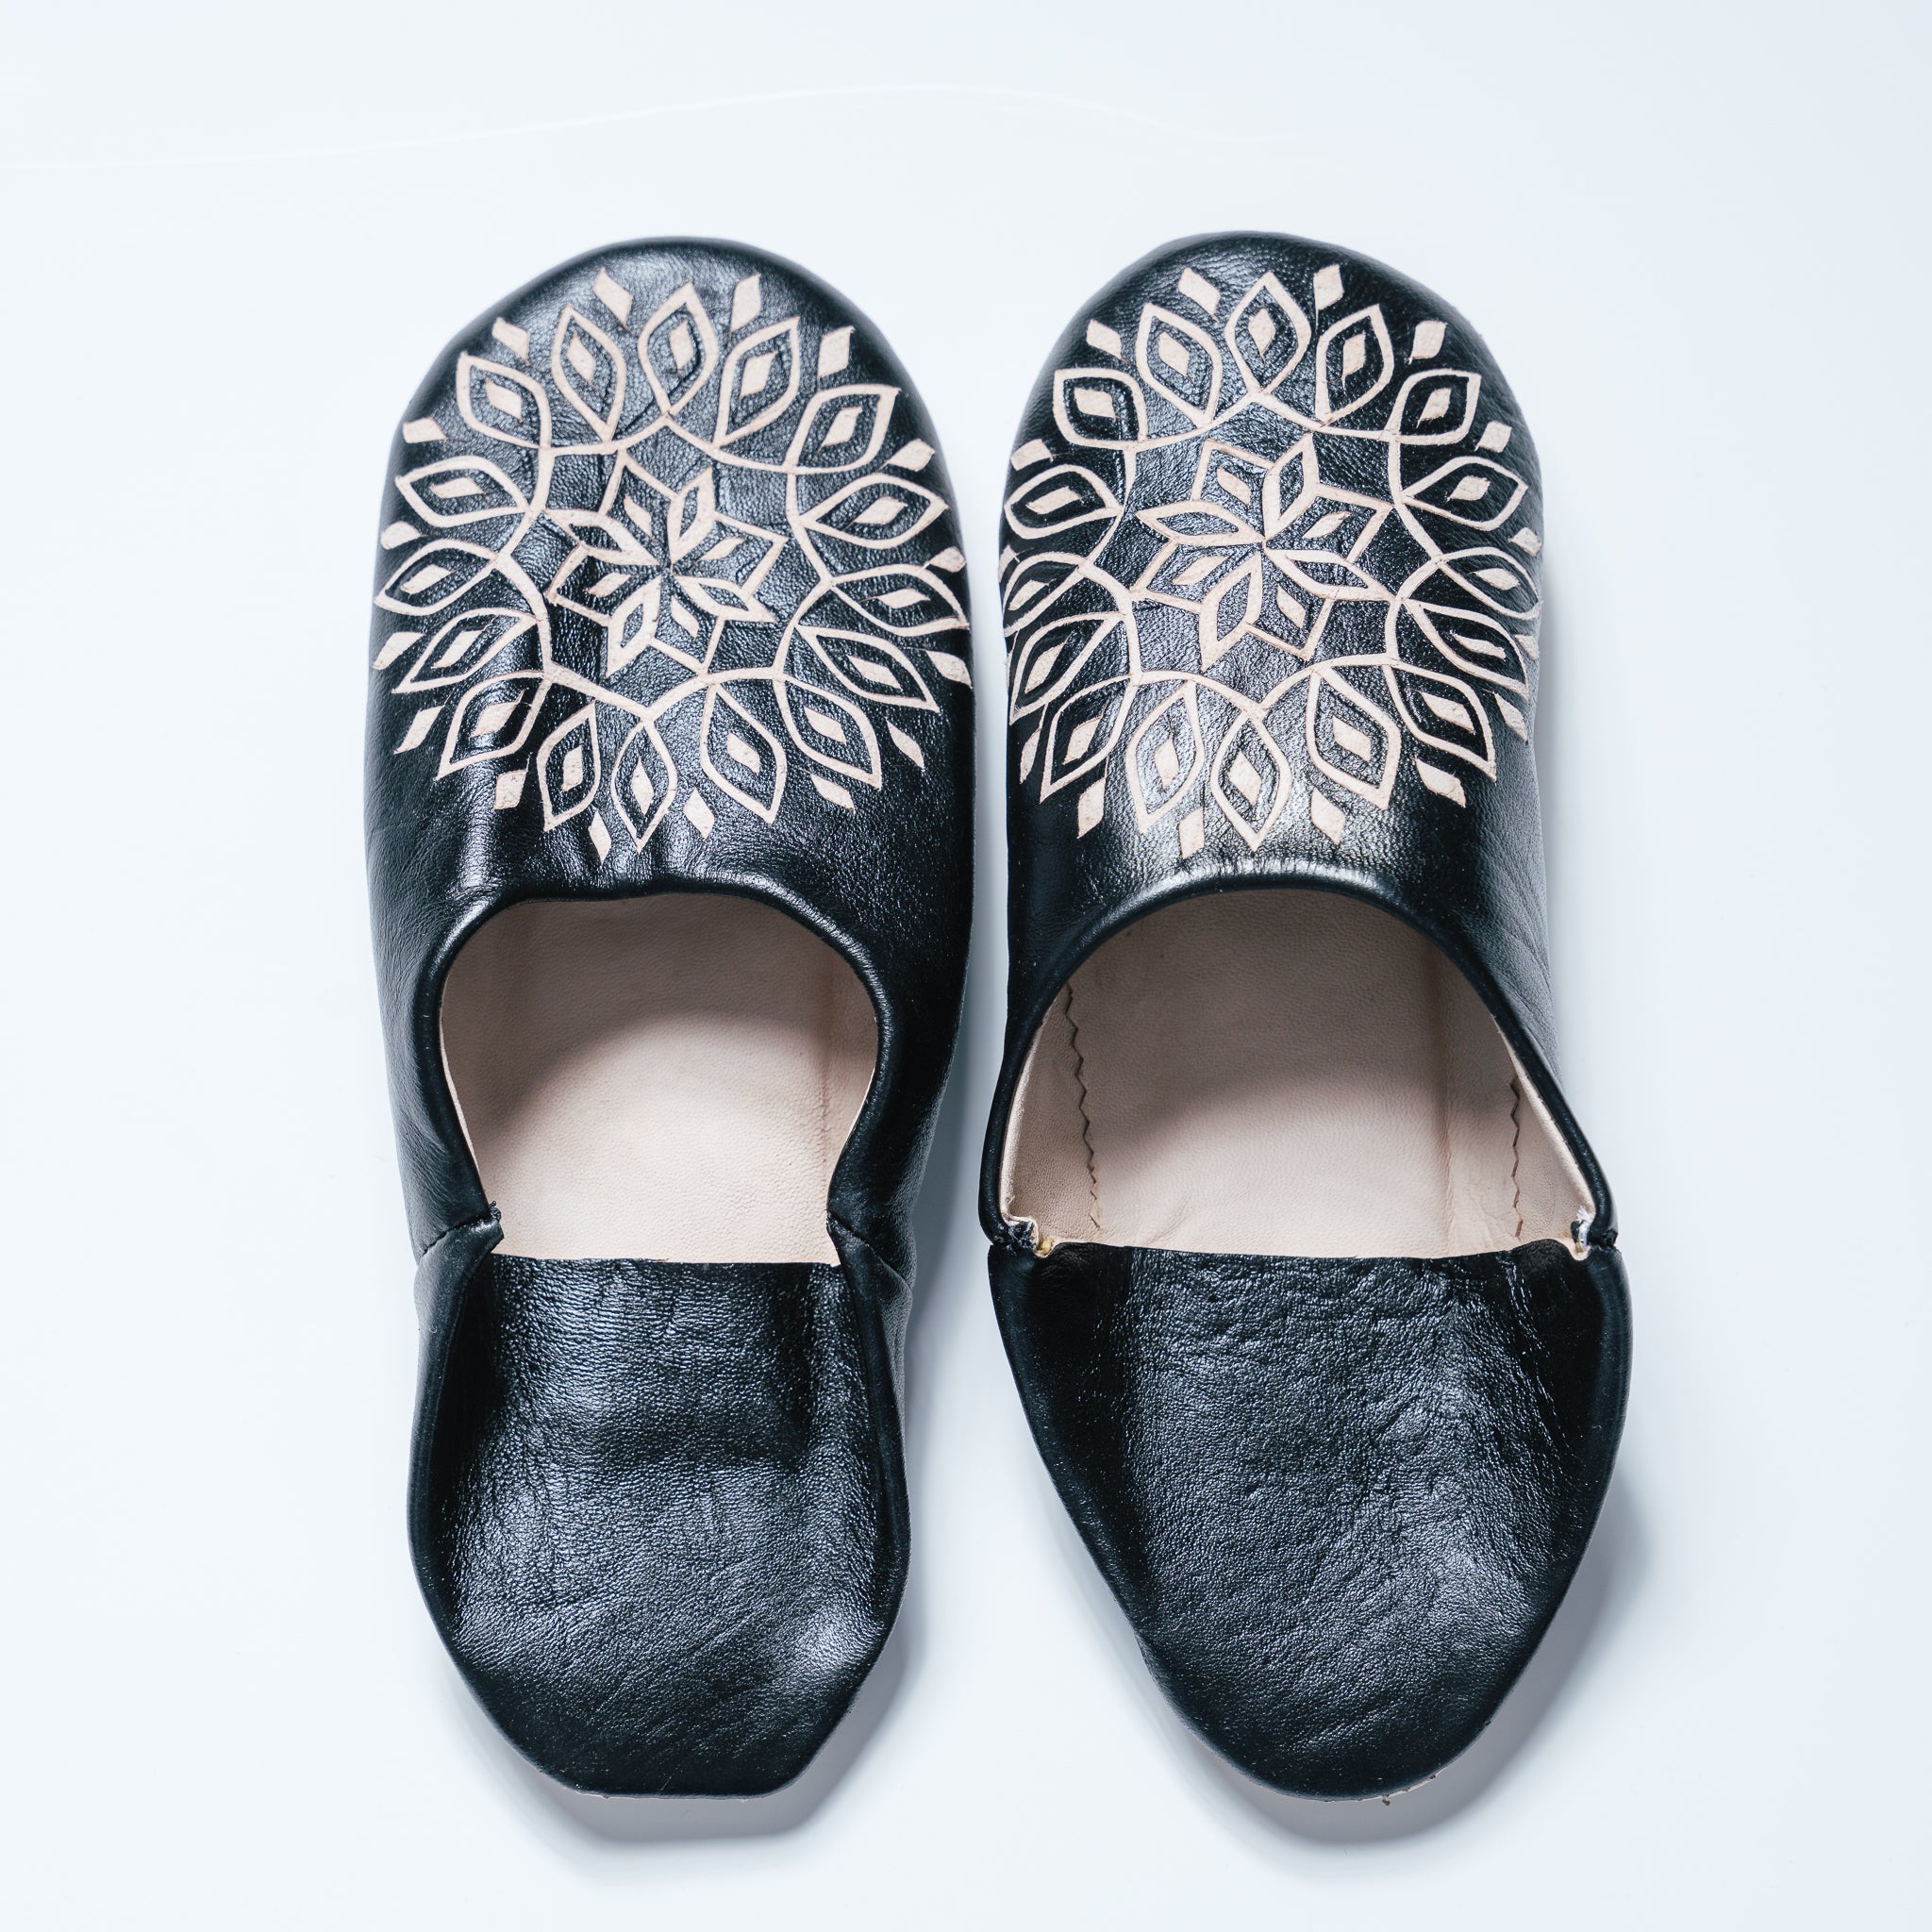 Moroccan Slippers black